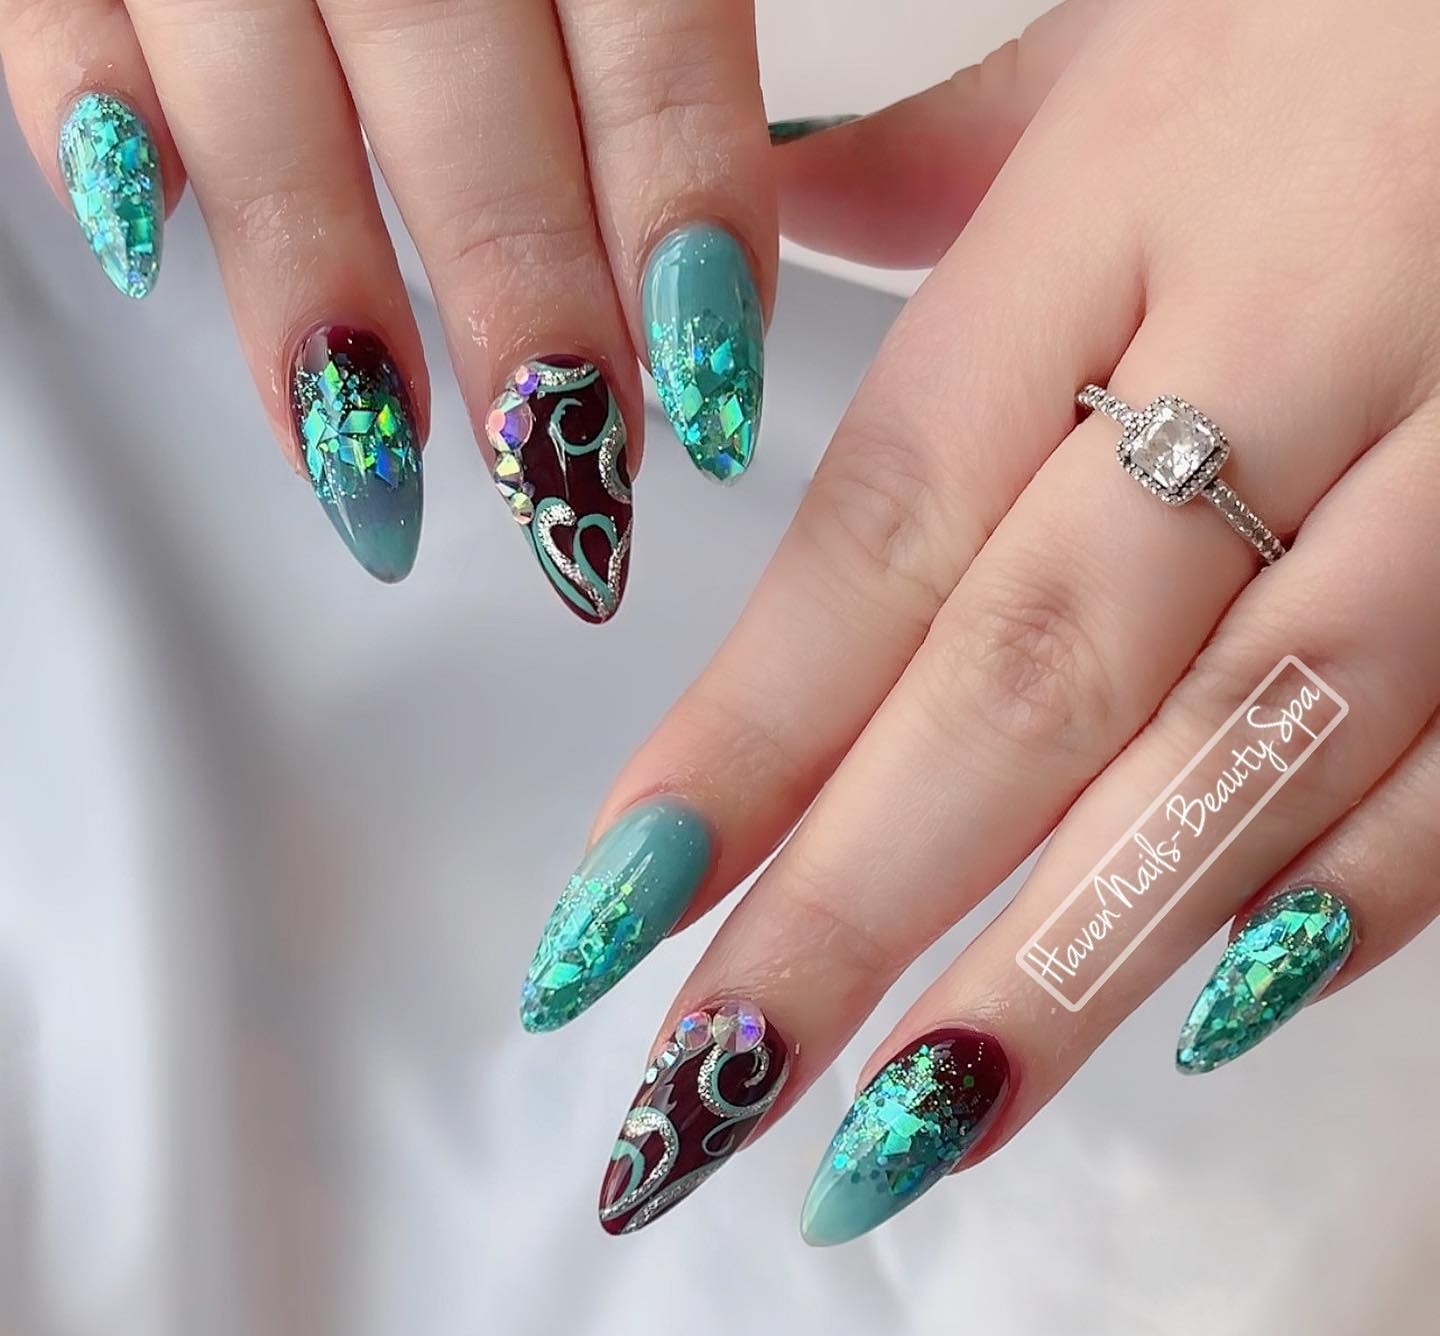 Green french ombre design with glitter